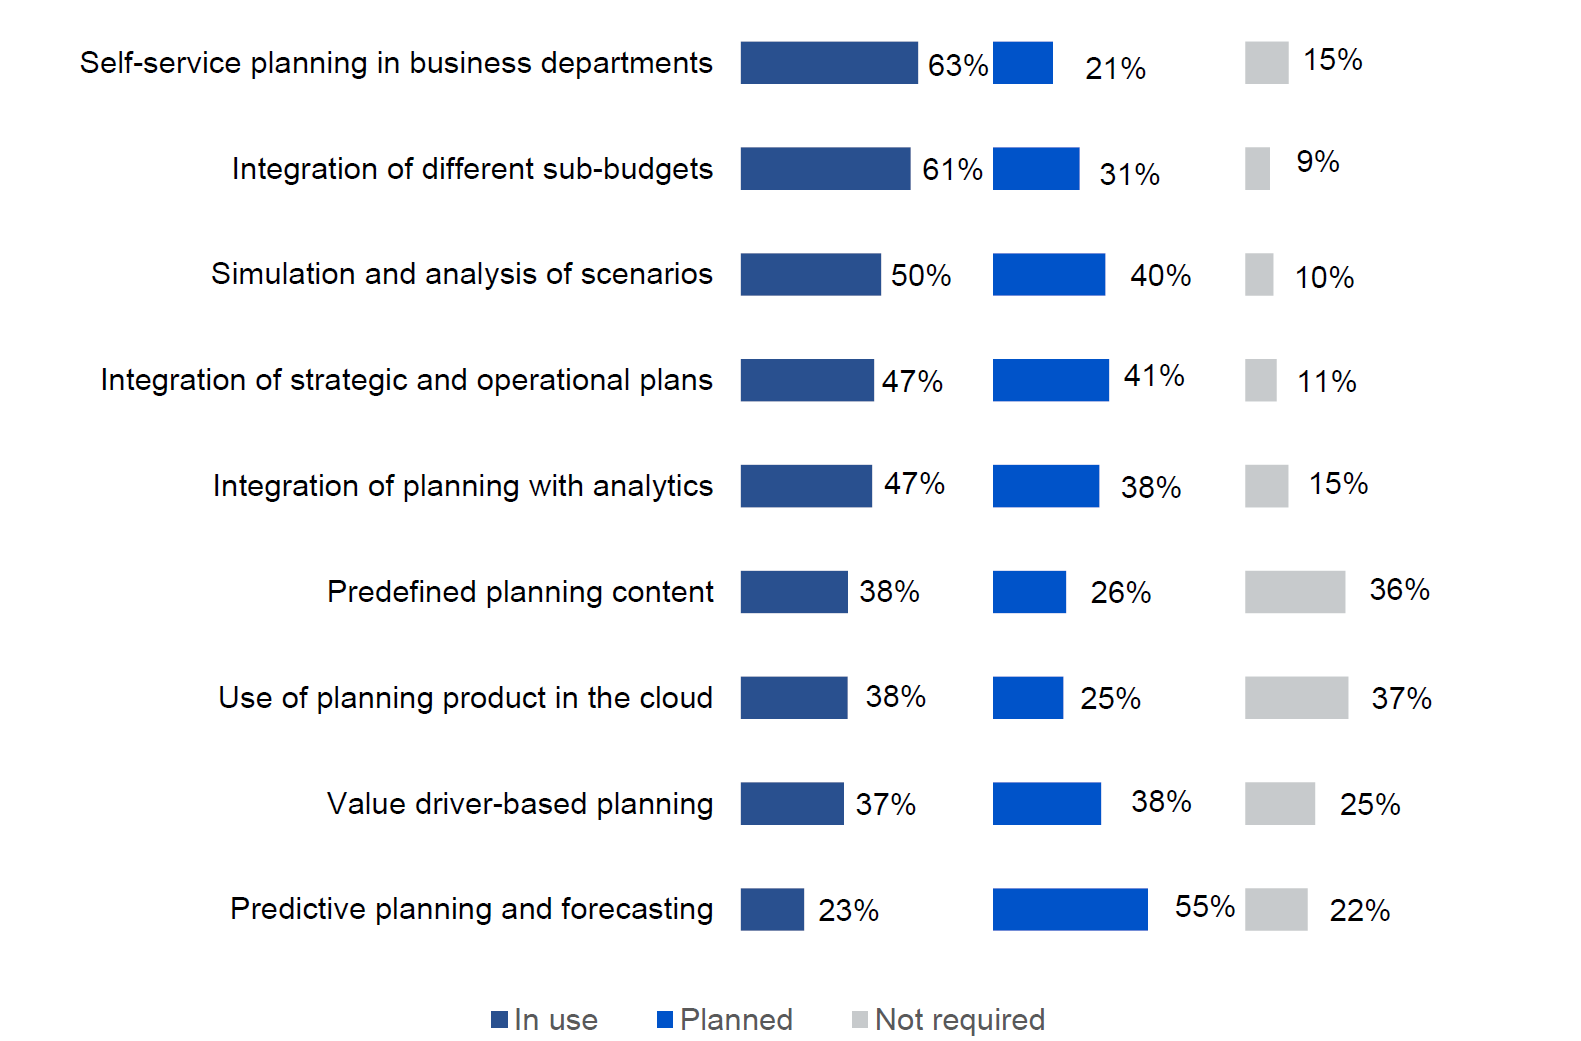 Which of the following does your company do/use with your product for planning and budgeting?